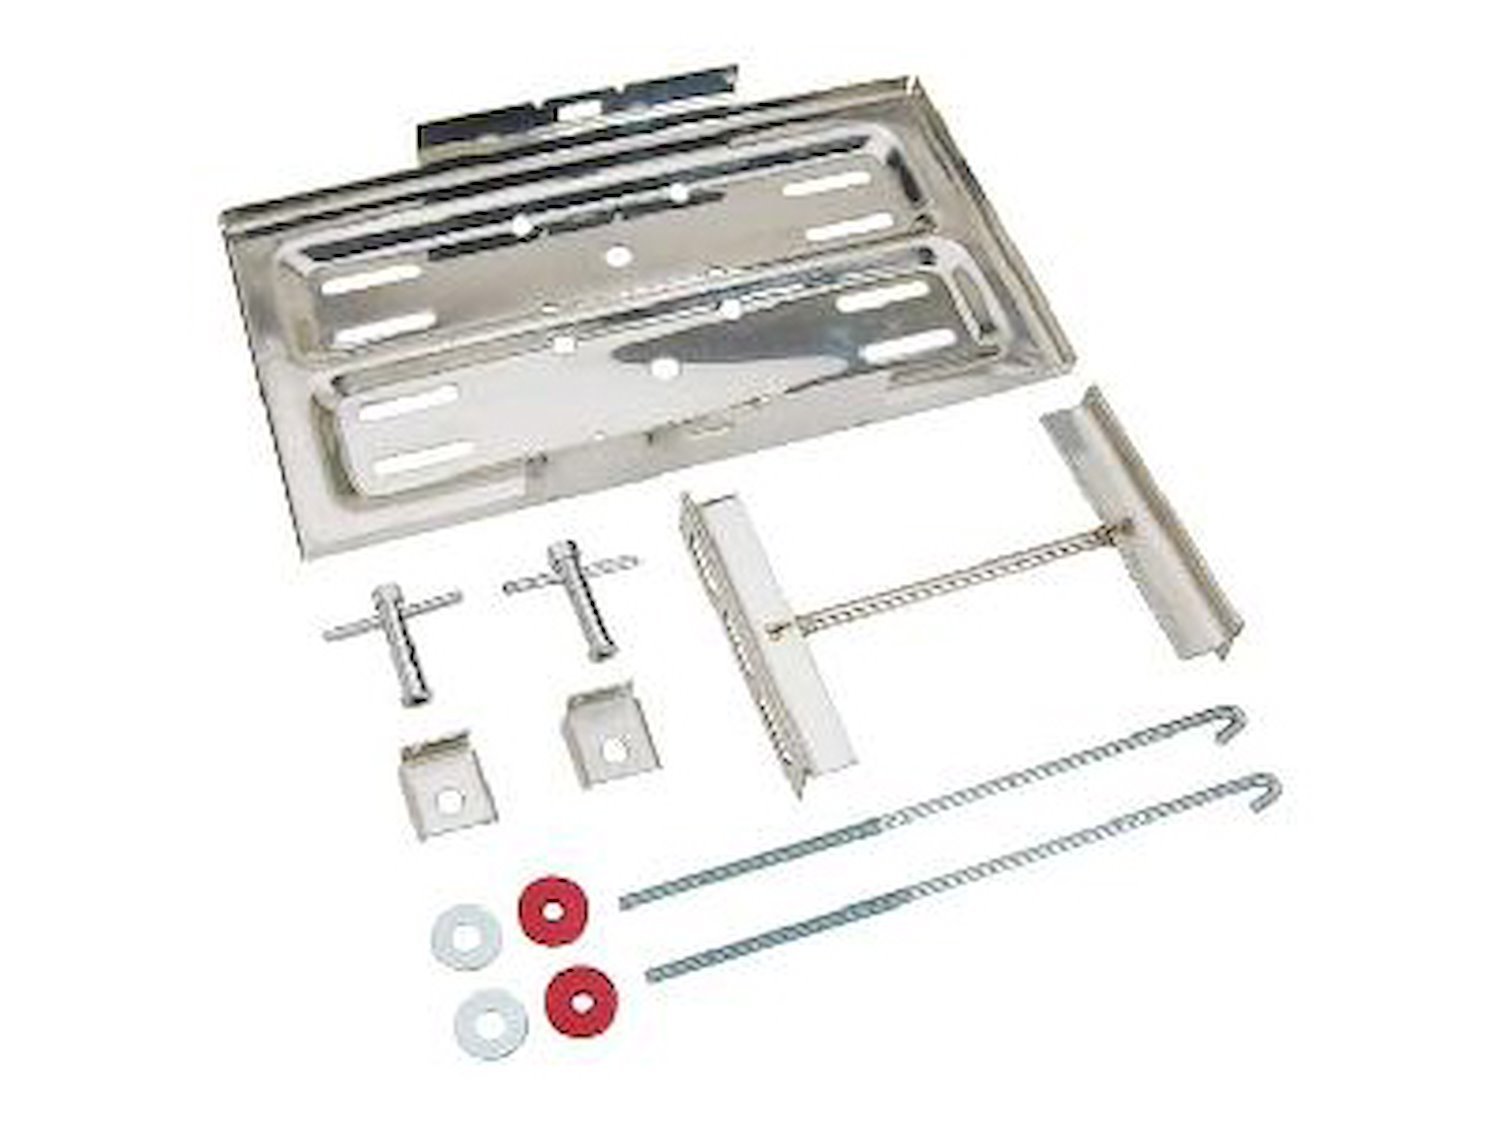 Stainless Steel Battery Tray Kit for Group 24, 27 and 74 Batteries [7 in. x 13 in.]